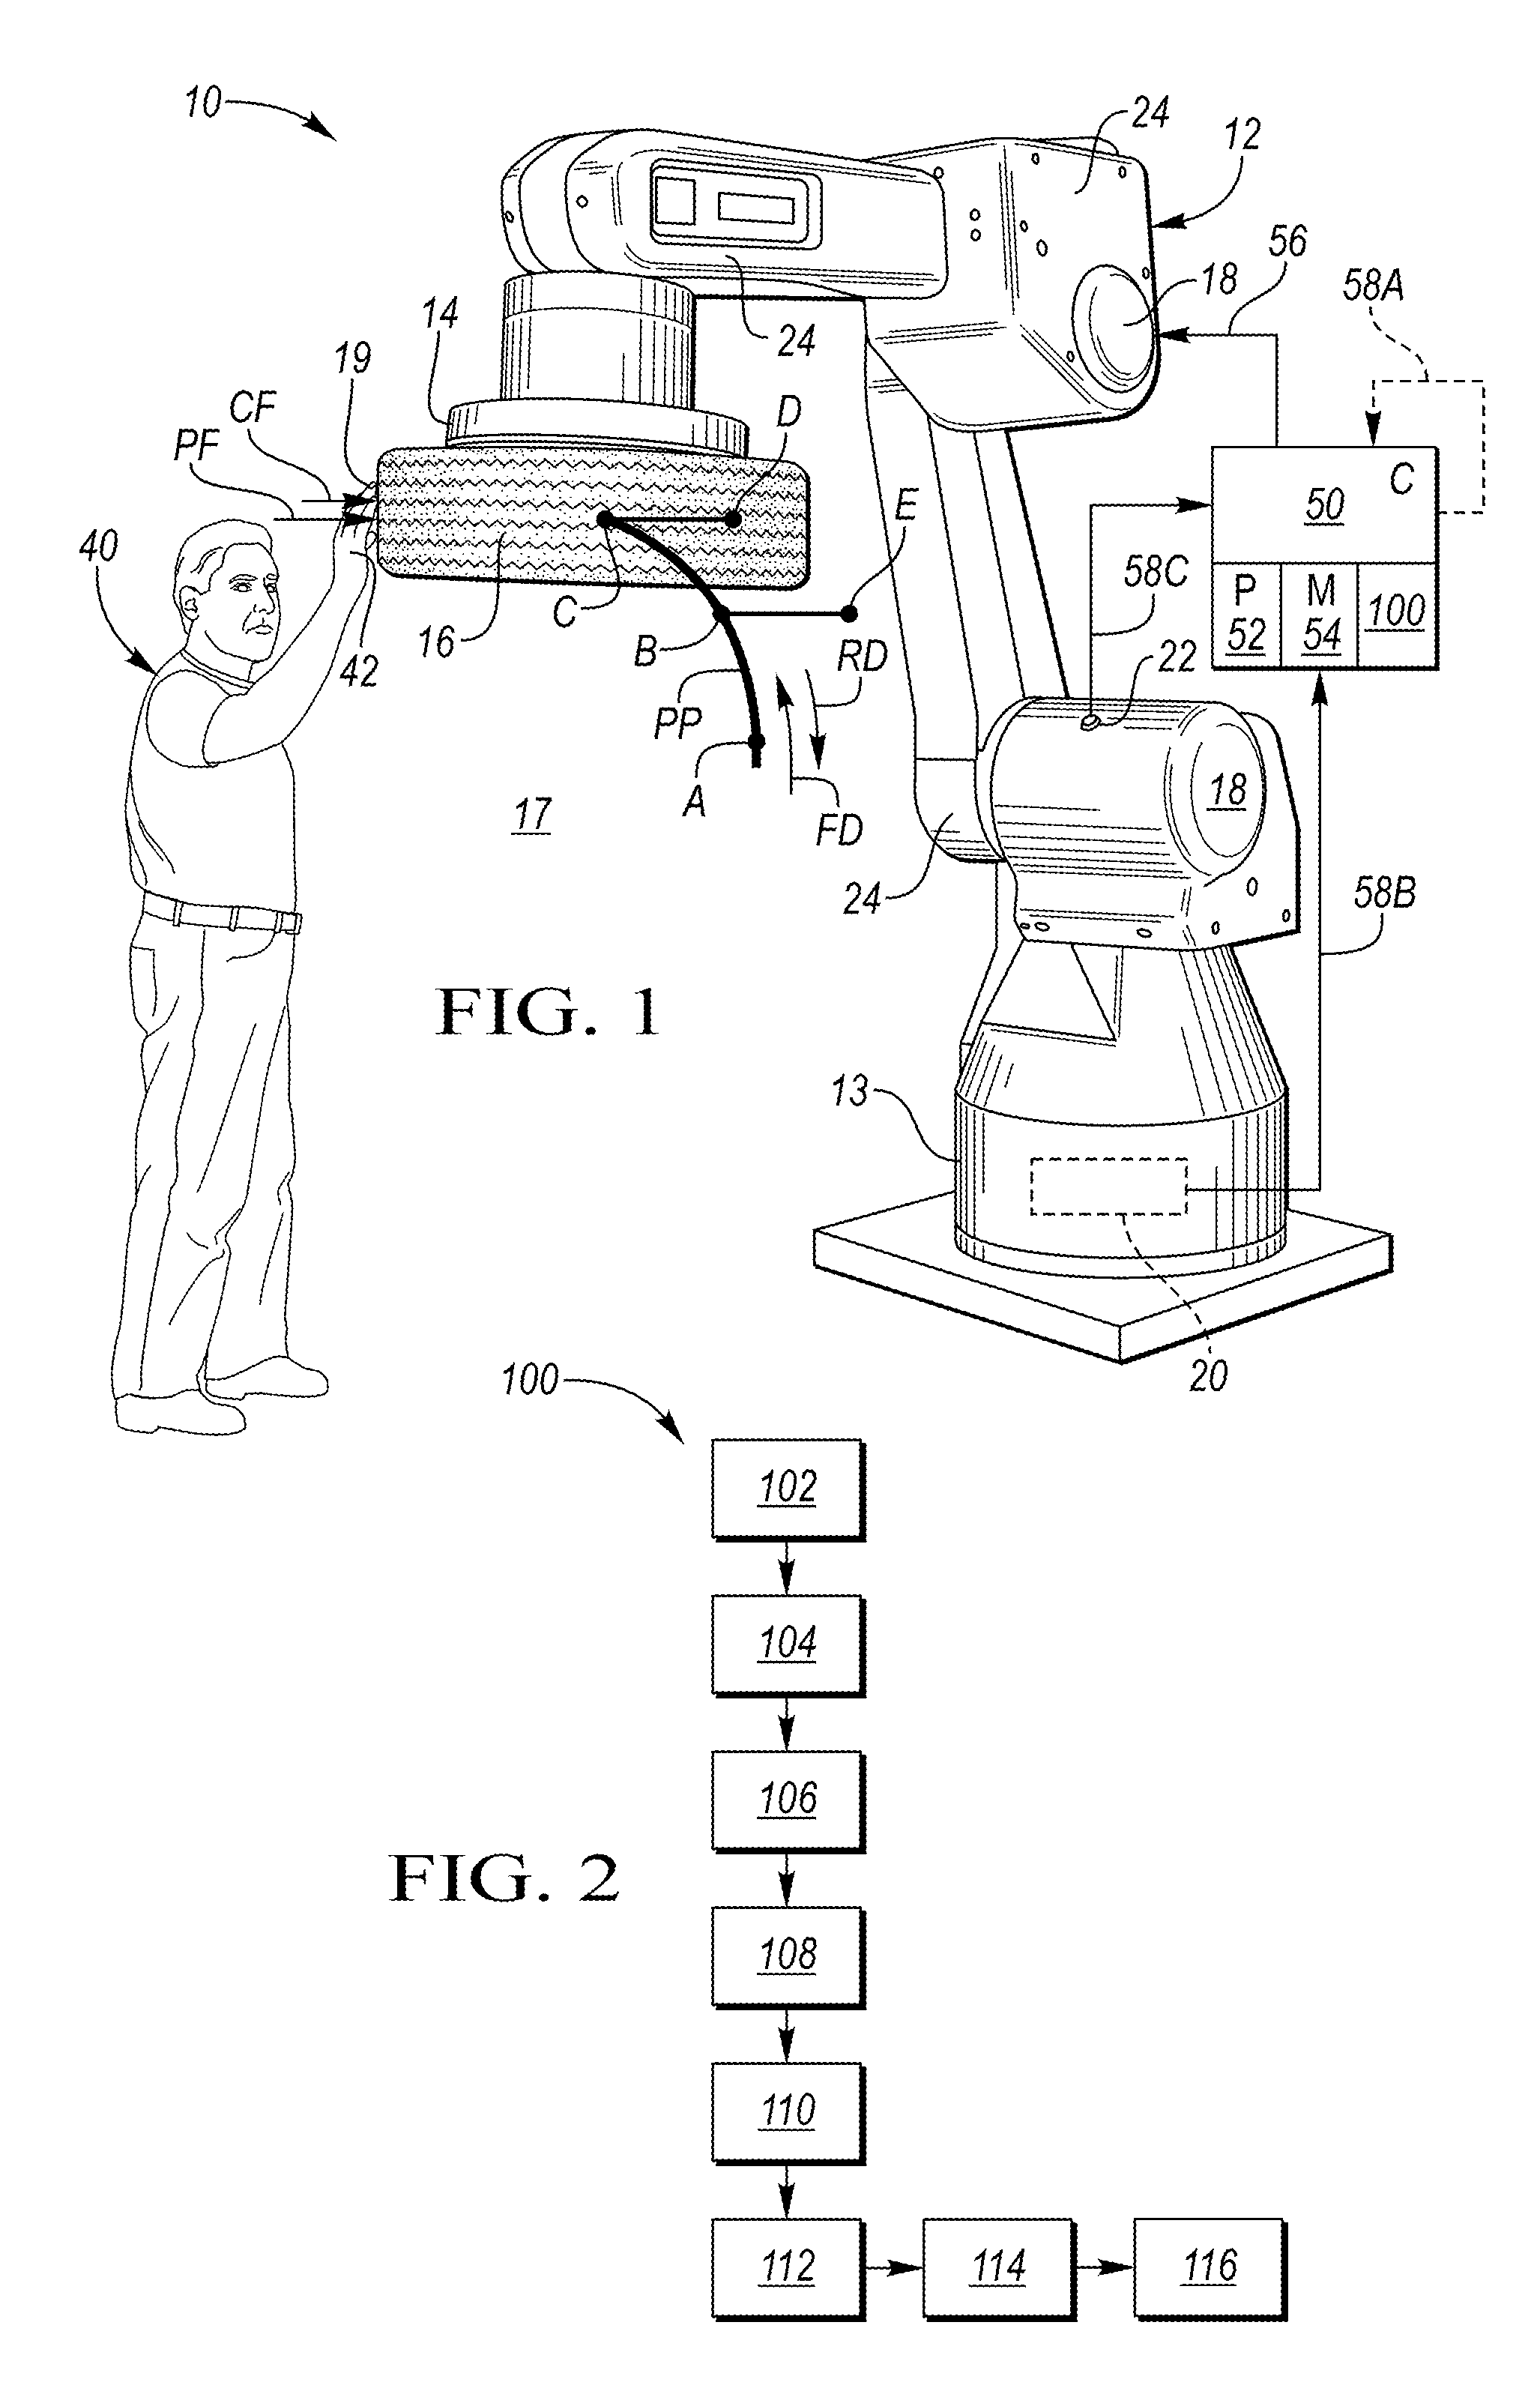 Collaborative robot system and method